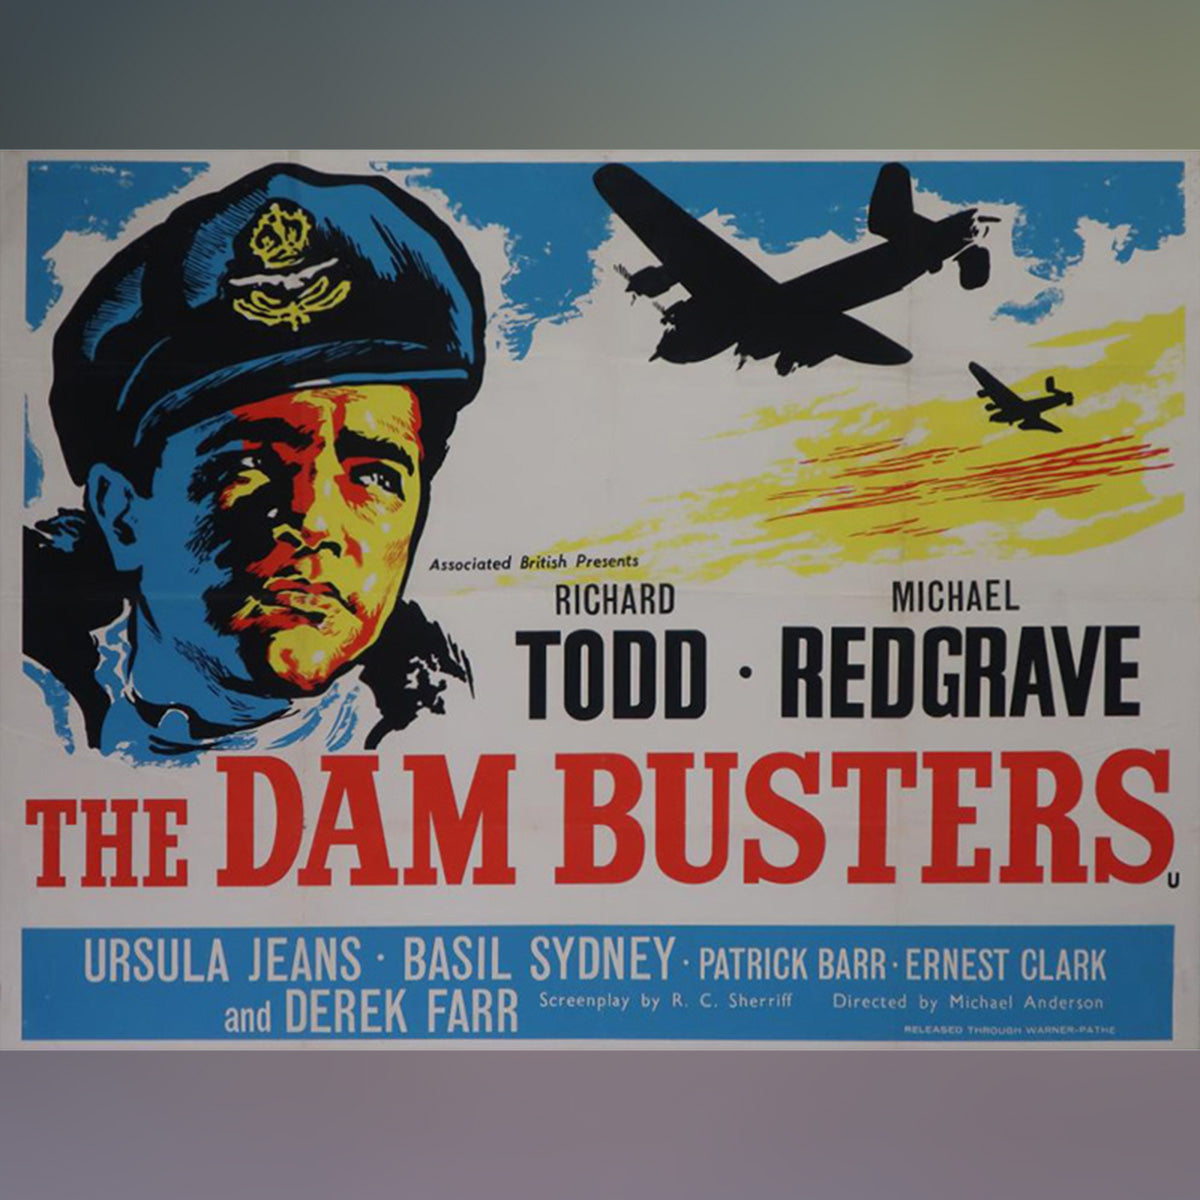 Original Movie Poster of Dam Busters, The (1960R)